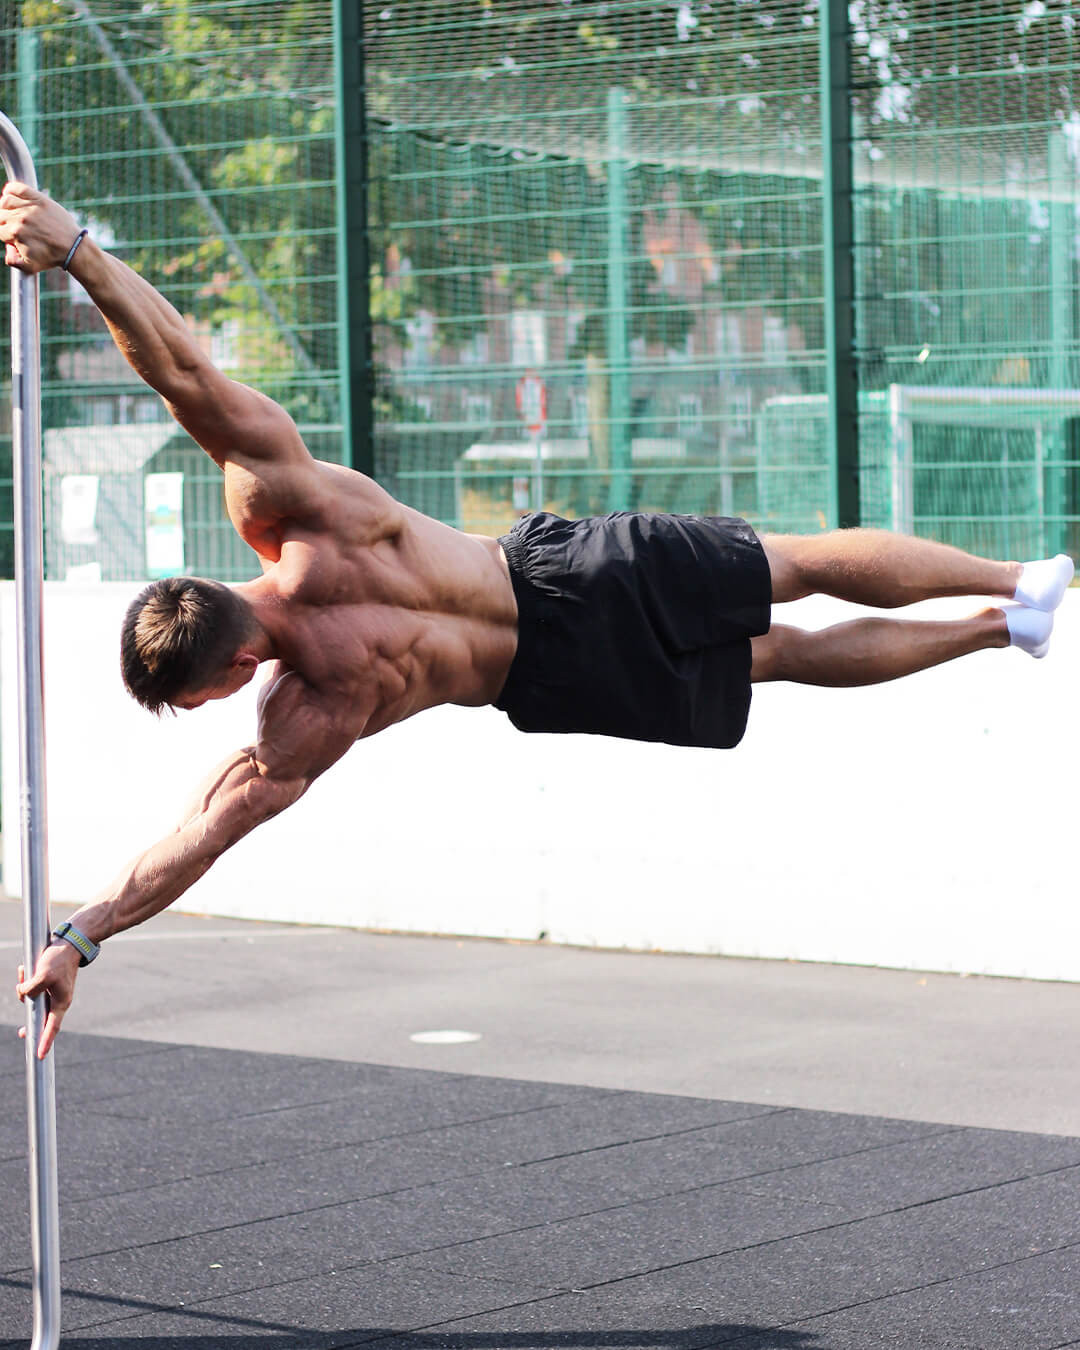 How to get started with Calisthenics